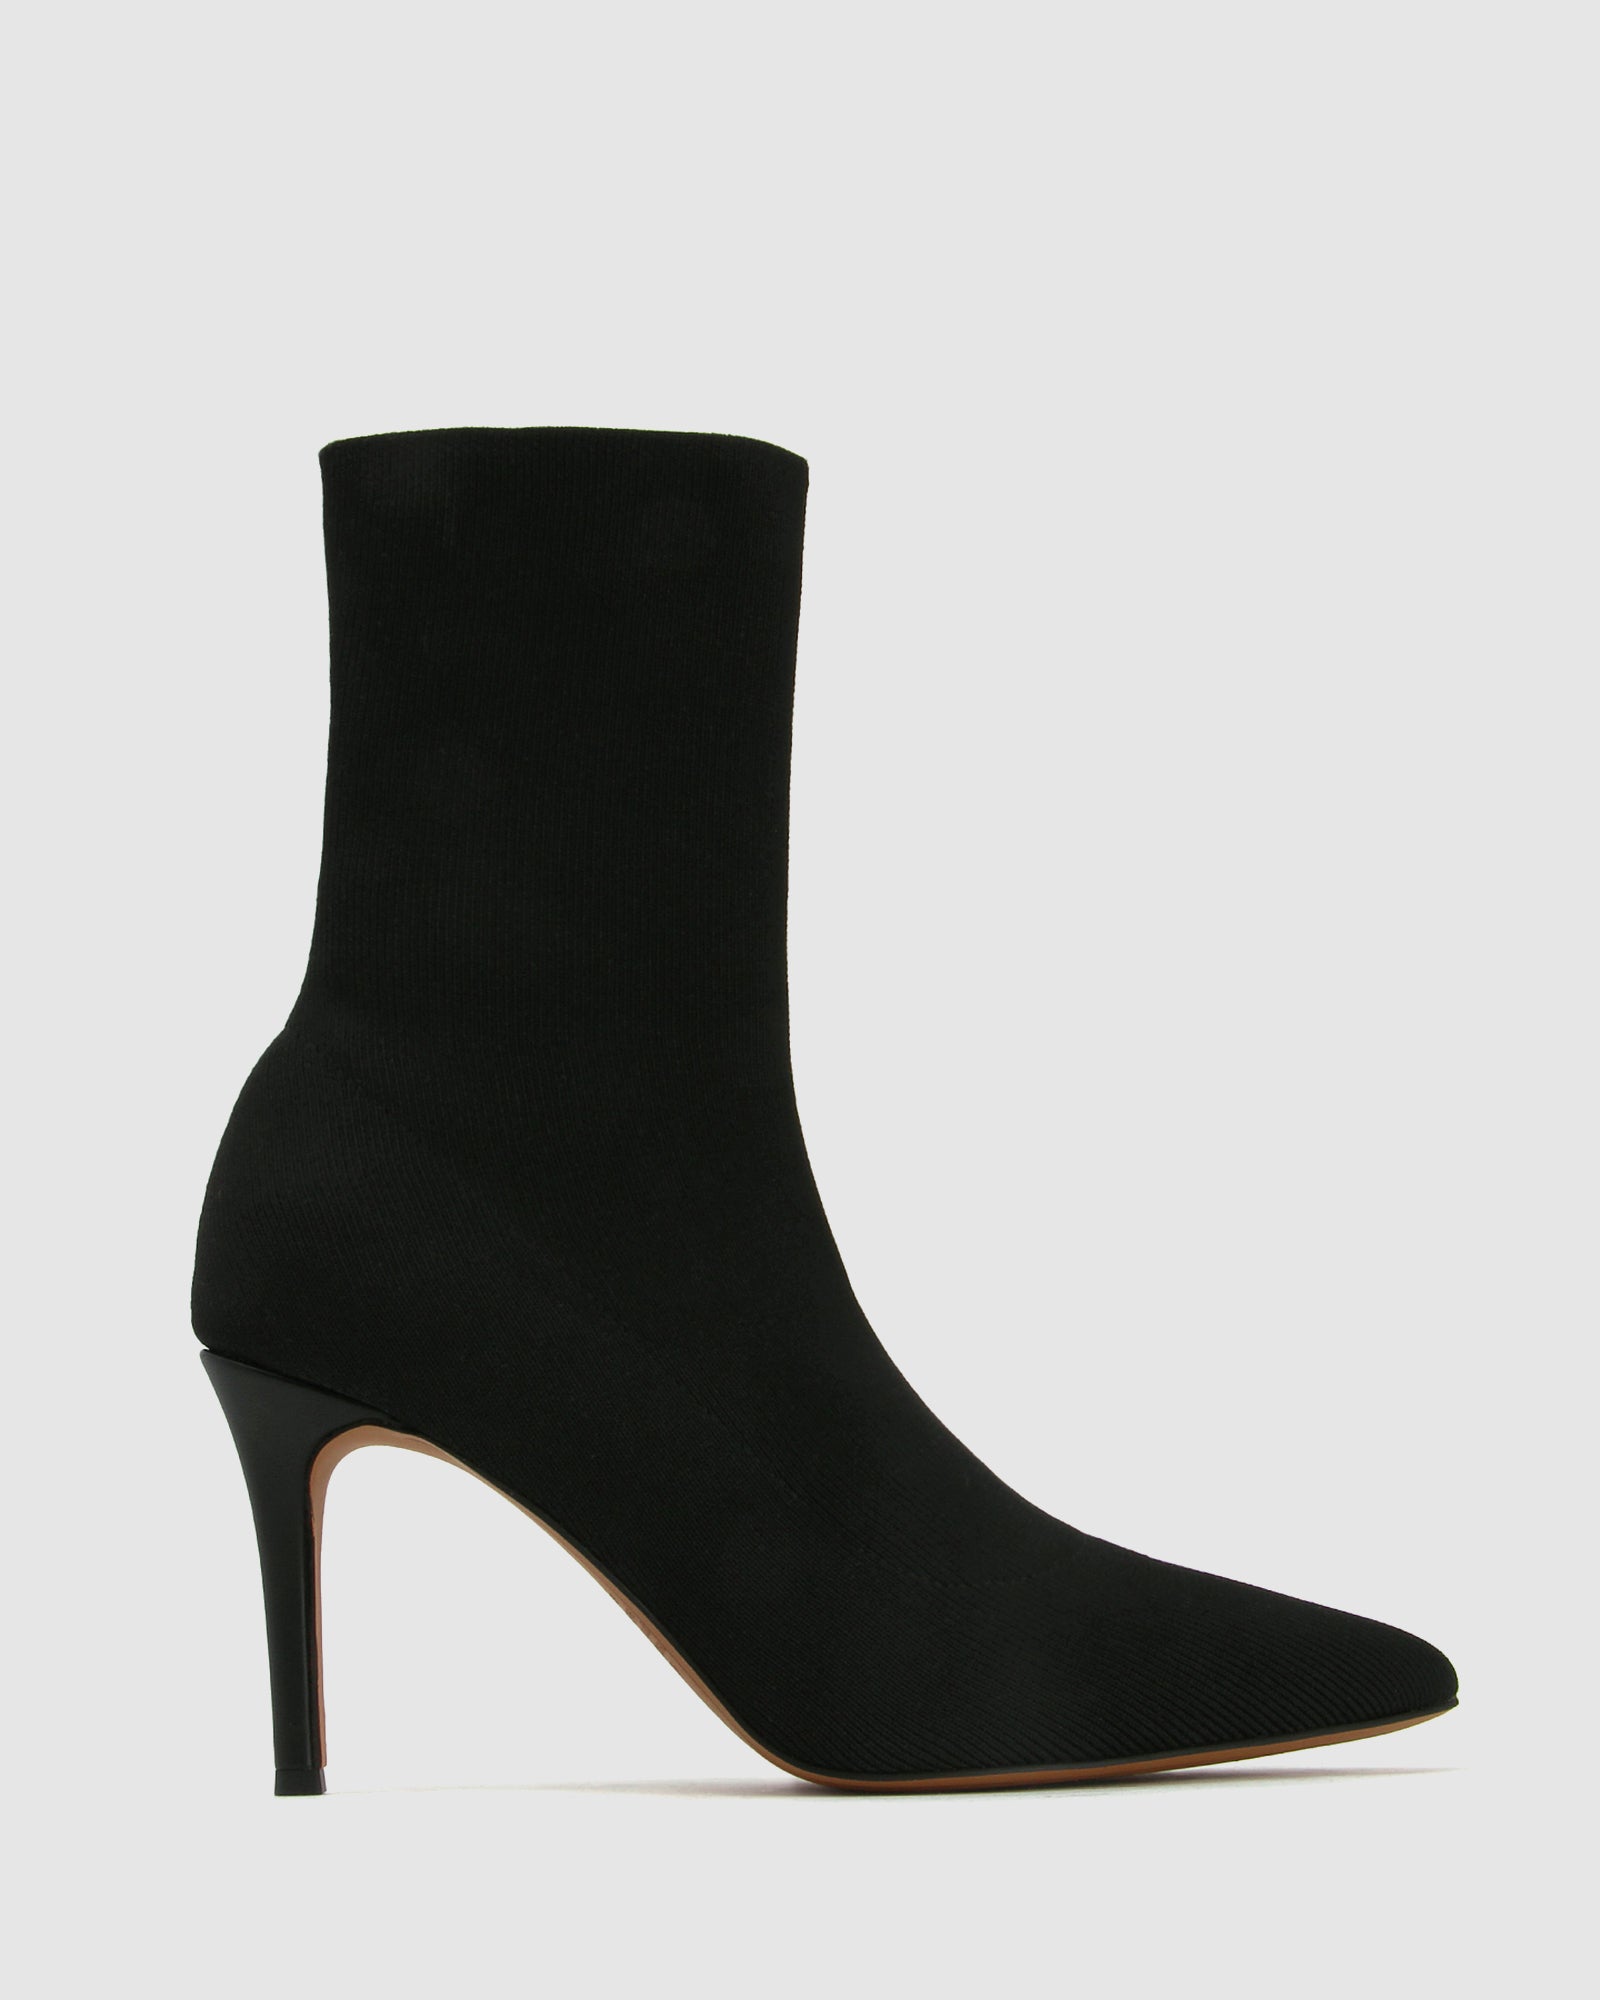 Buy CHANNING Stiletto Sock Boots by Betts online - Betts